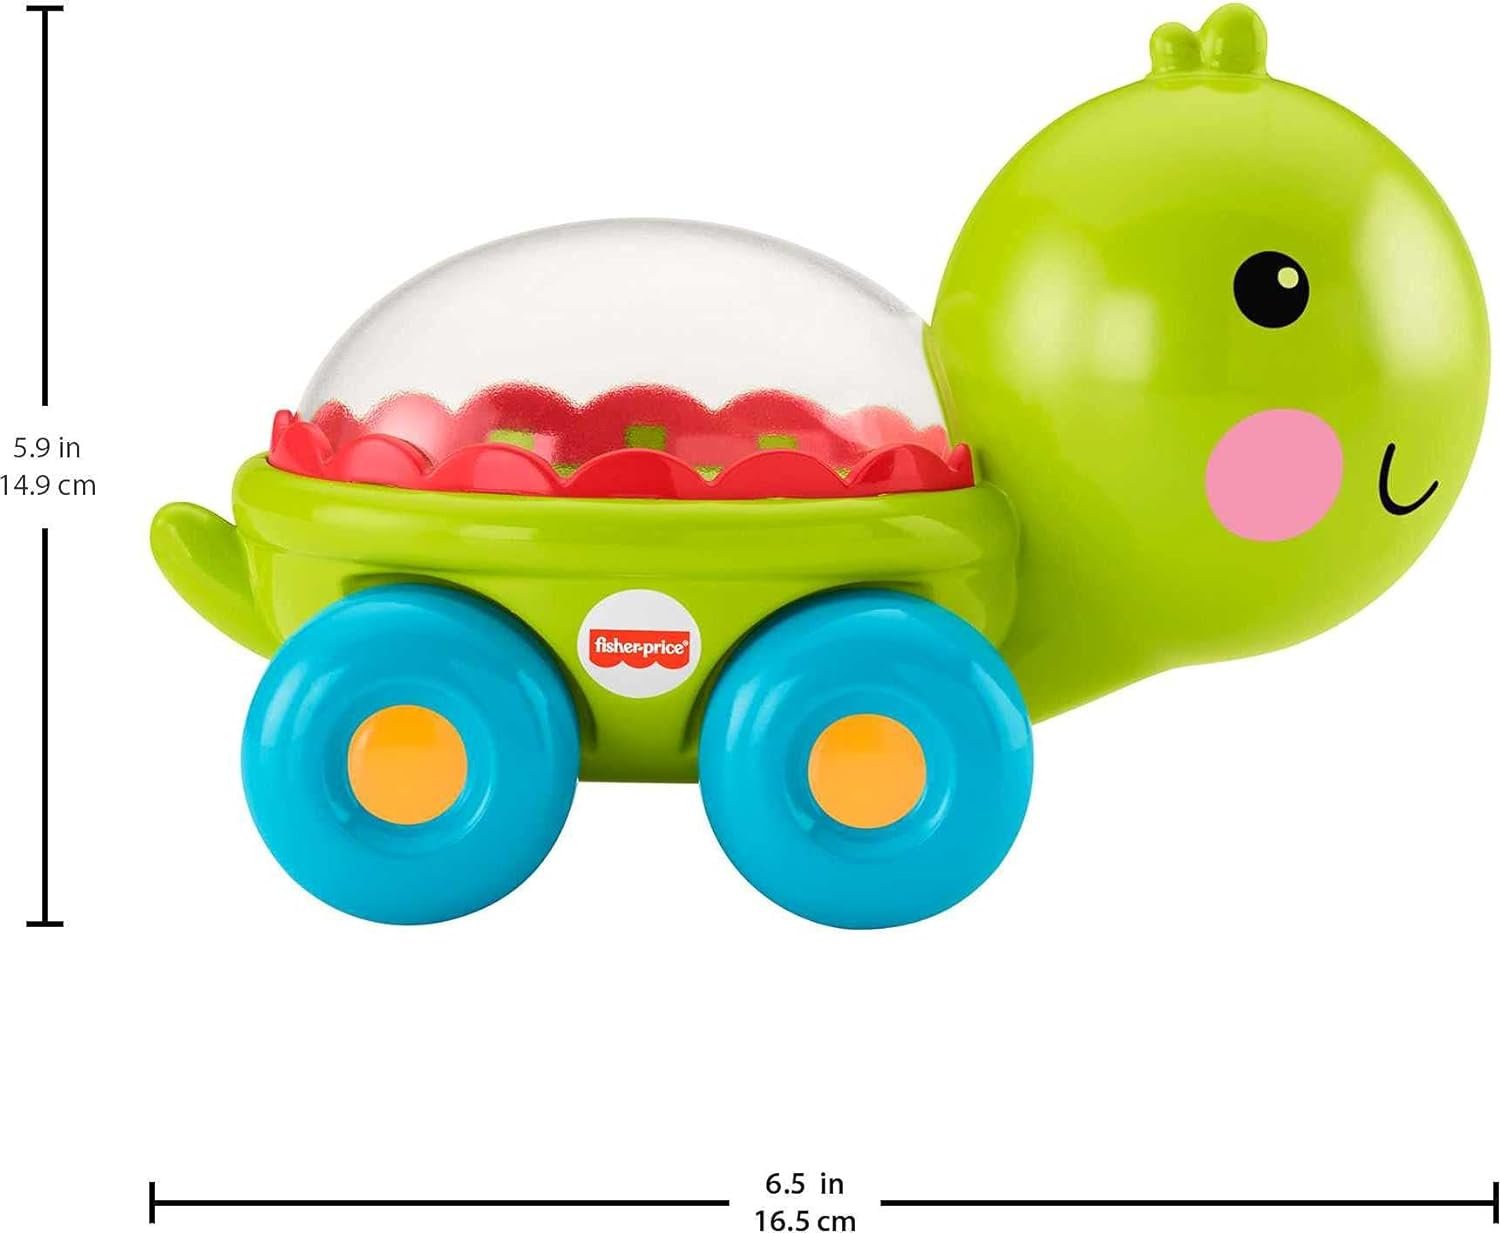 Fisher-Price Baby Crawling Toy Review